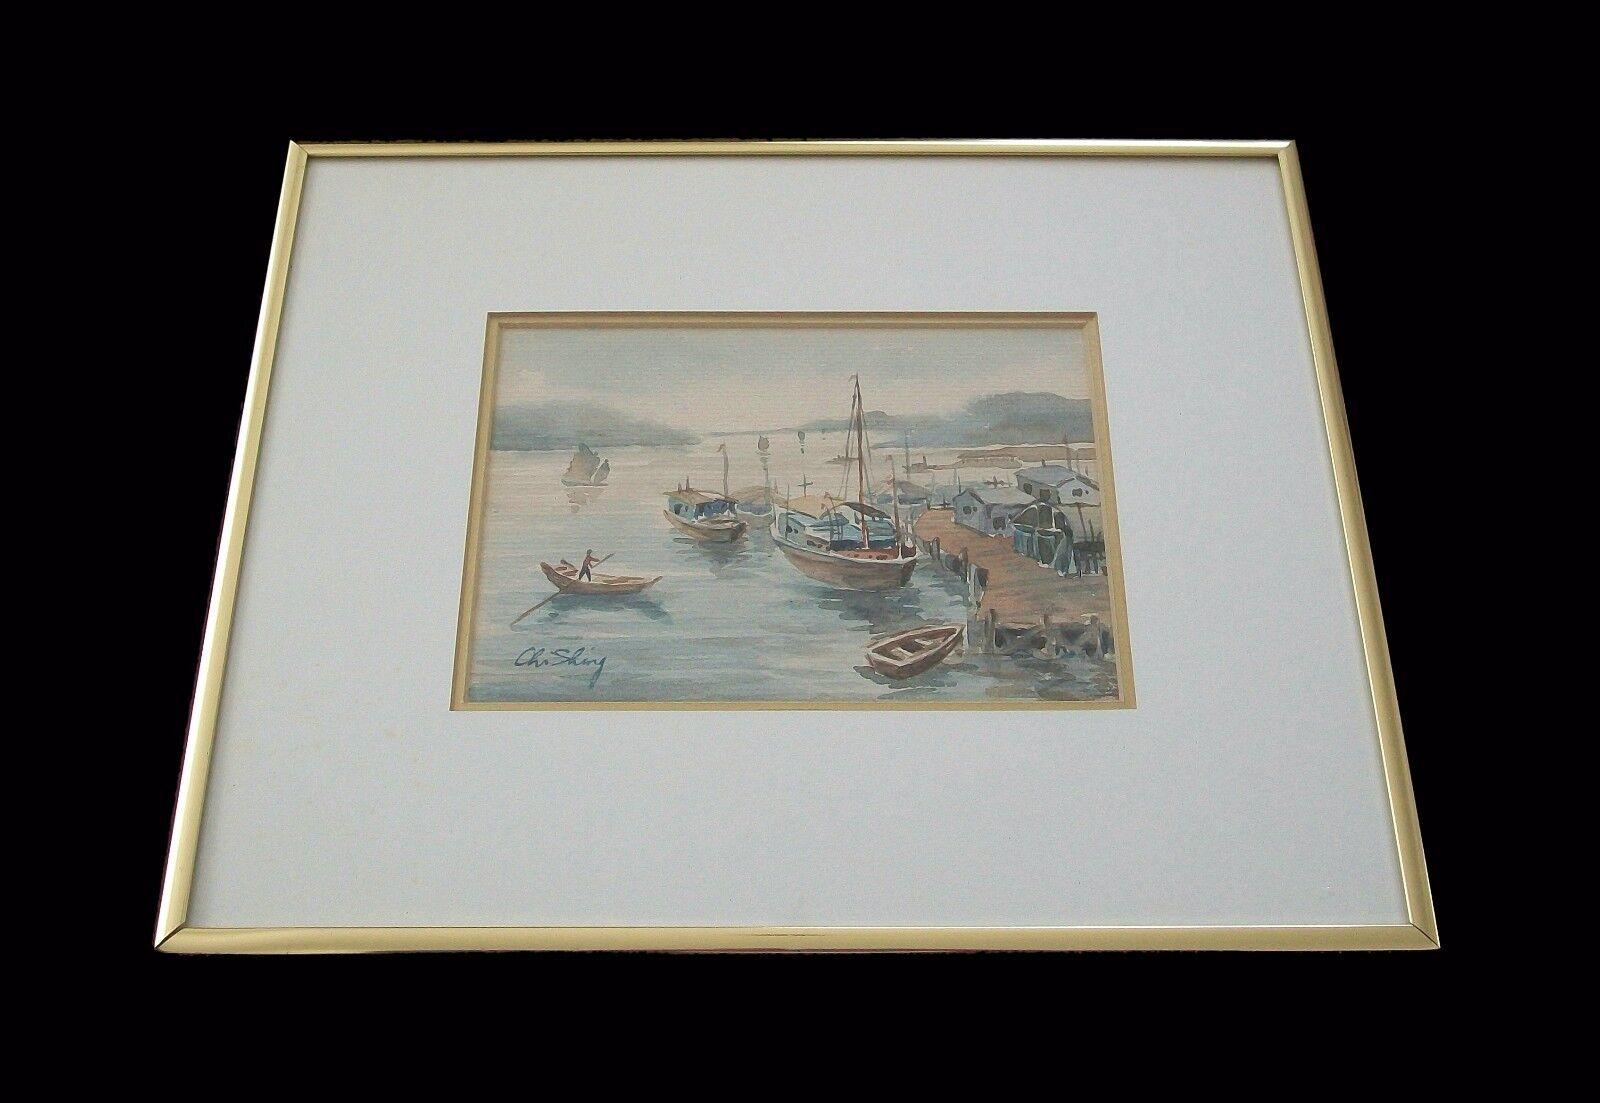 CHI SHING - 'River Boats I' - Vintage watercolor landscape painting - vintage gold tone metal frame - finished with double matte boards - signed lower left - China - mid 20th century. 

Excellent vintage condition - painting not viewed outside the